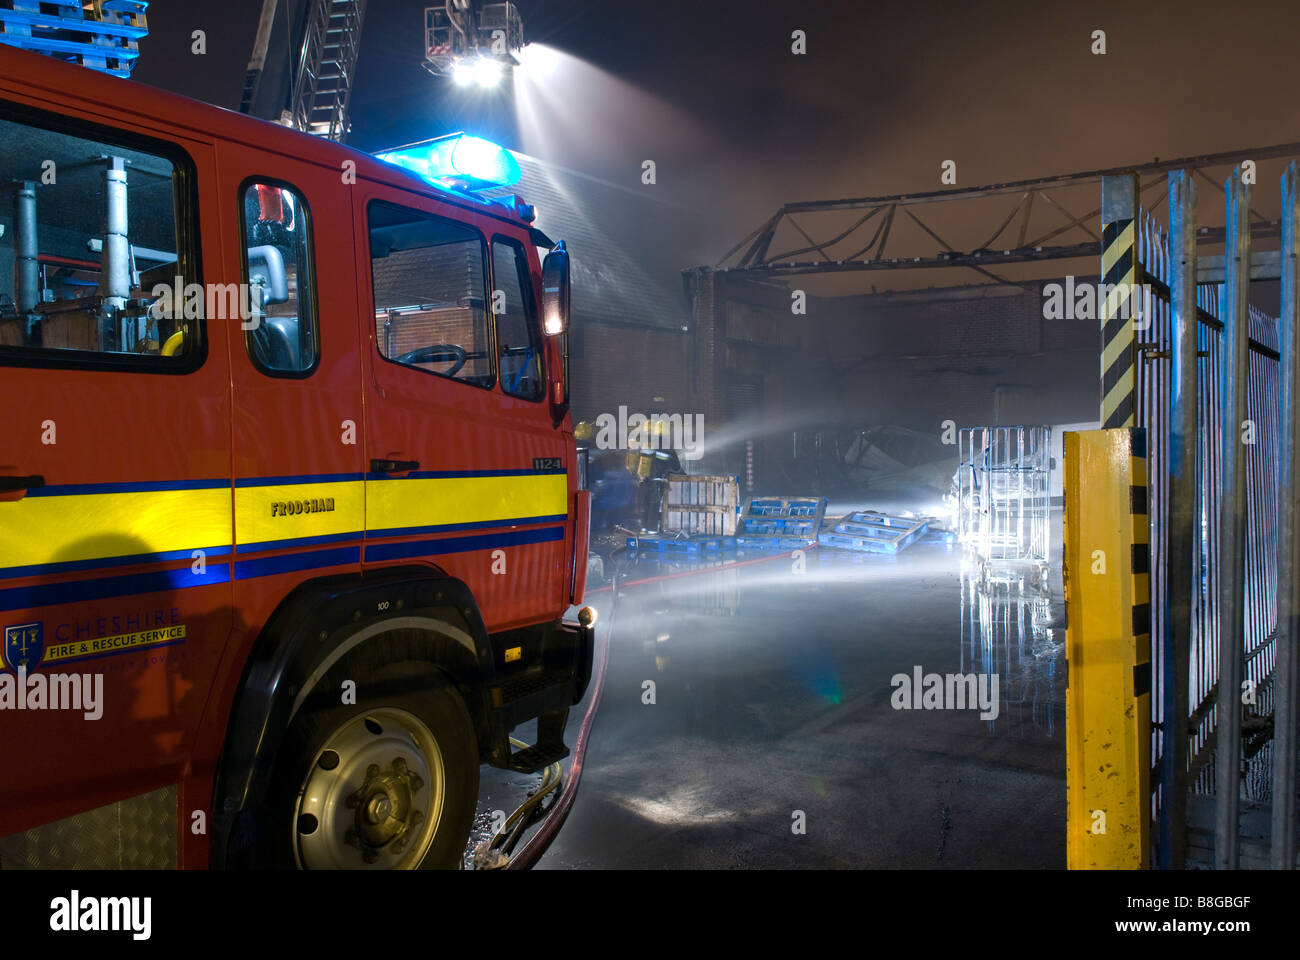 Fire Engine / Appliance at night at fire with headlights on Stock Photo